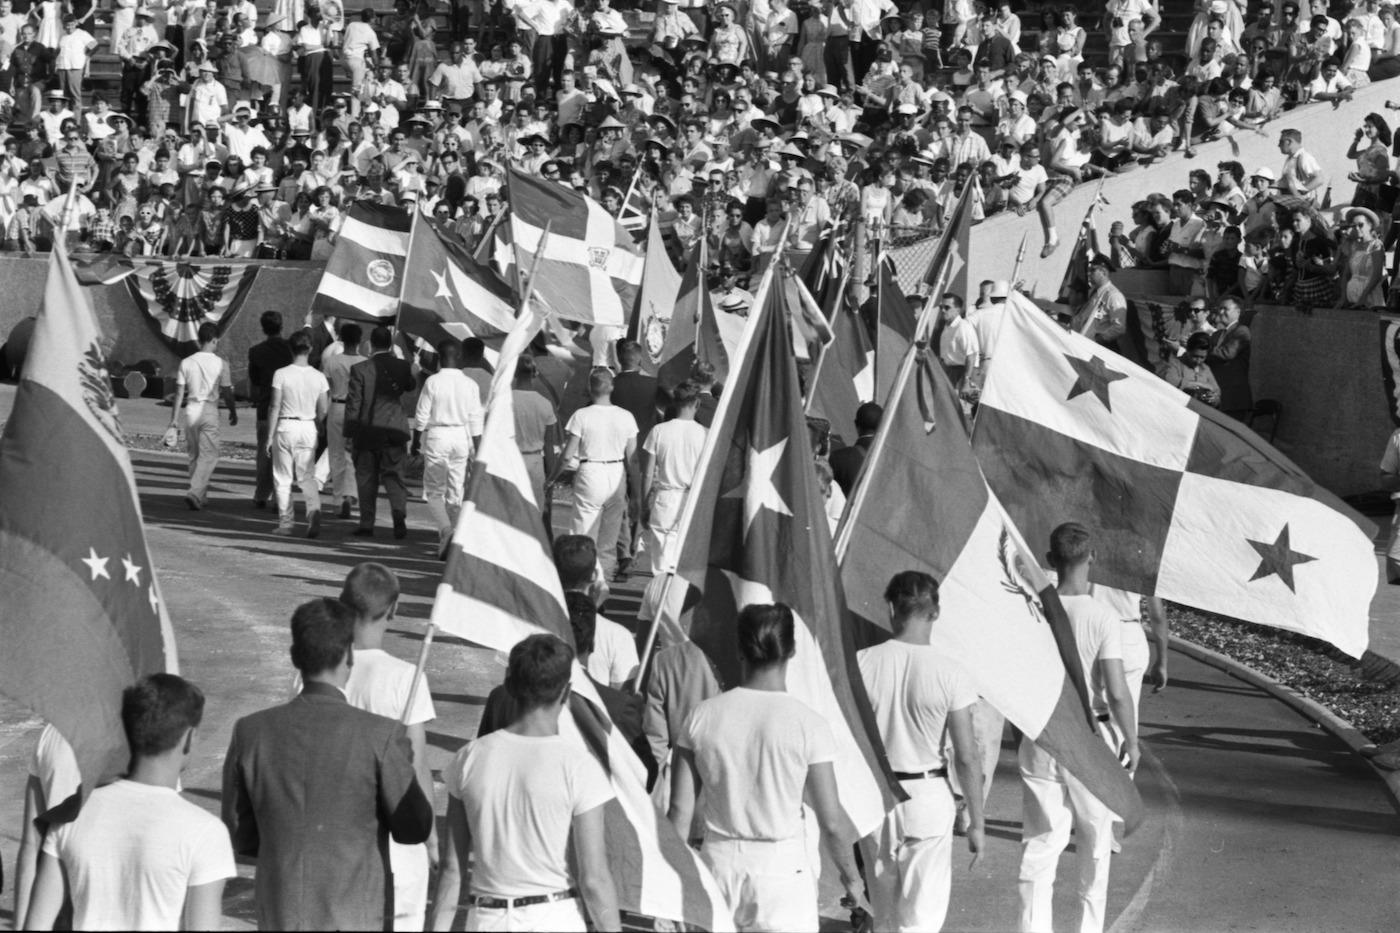 A parade of flags during the 1959 Pan-American Games in Chicago's Soldier Field. Photo: Chicago History Museum